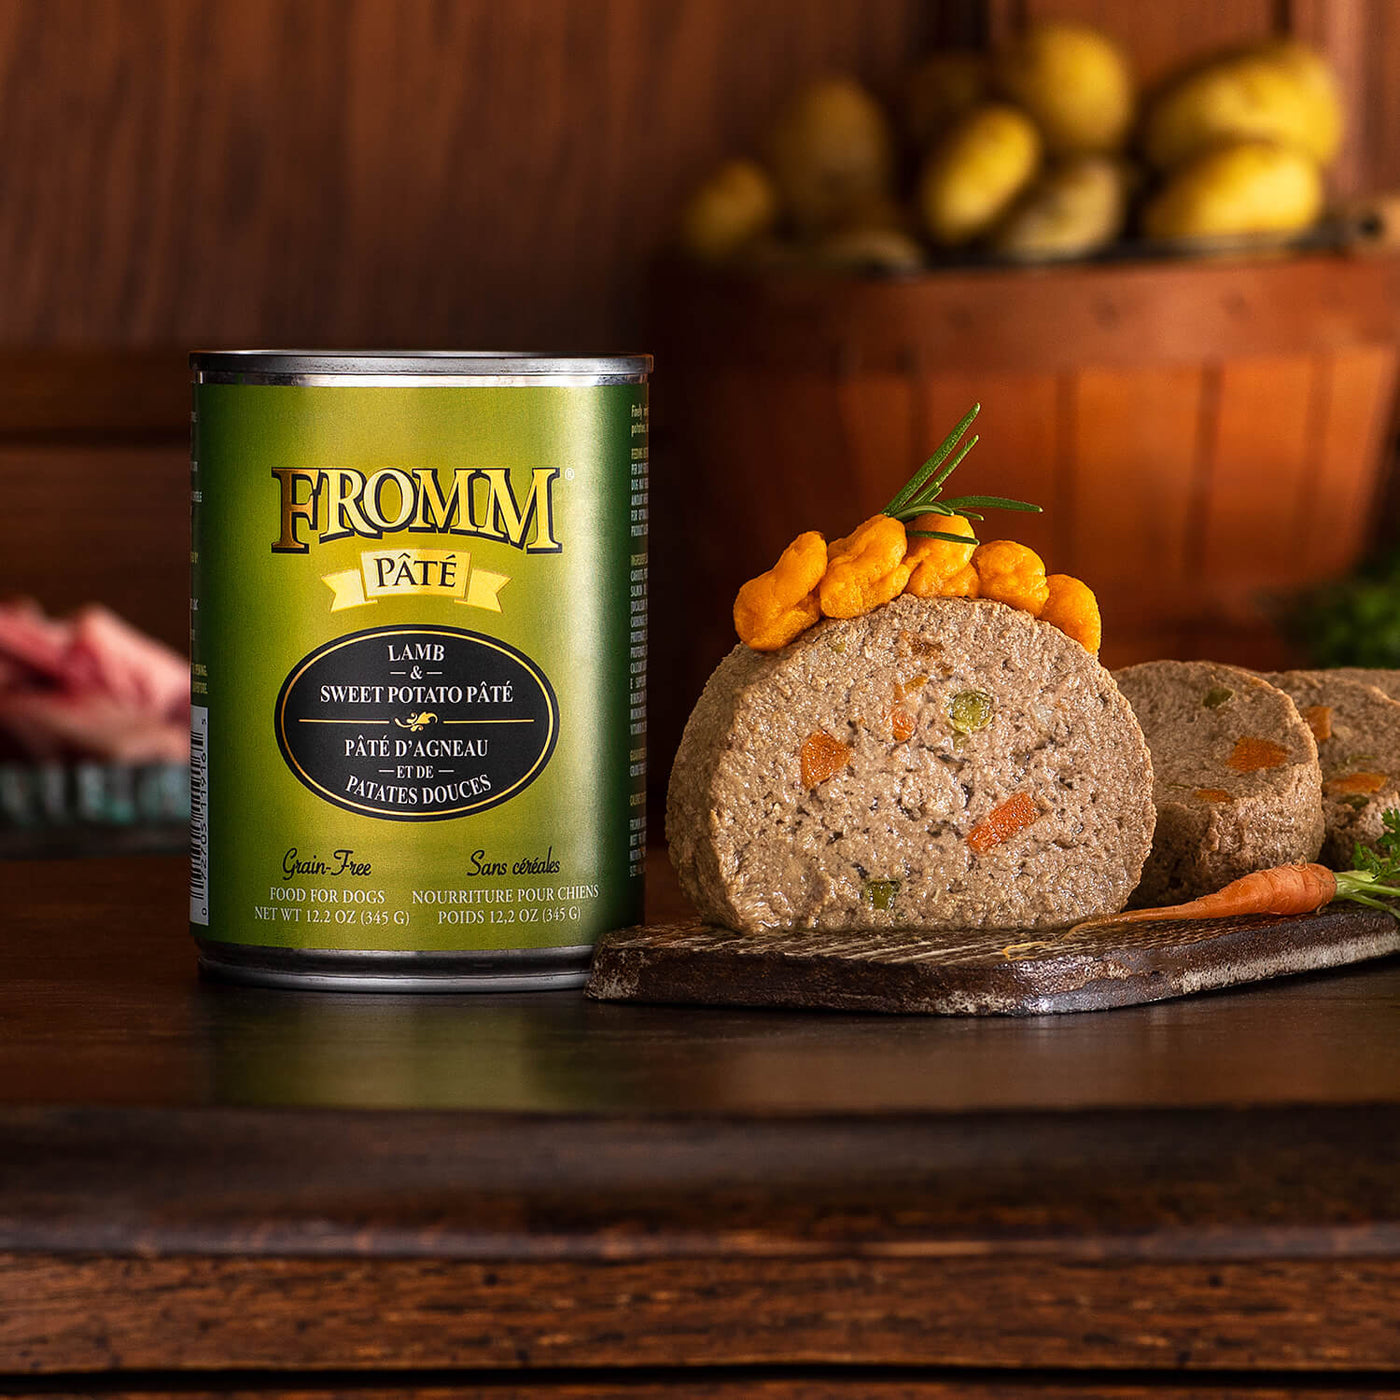 Lamb & Sweet Potato Pate - Wet Dog Food - Fromm - PetToba-Fromm